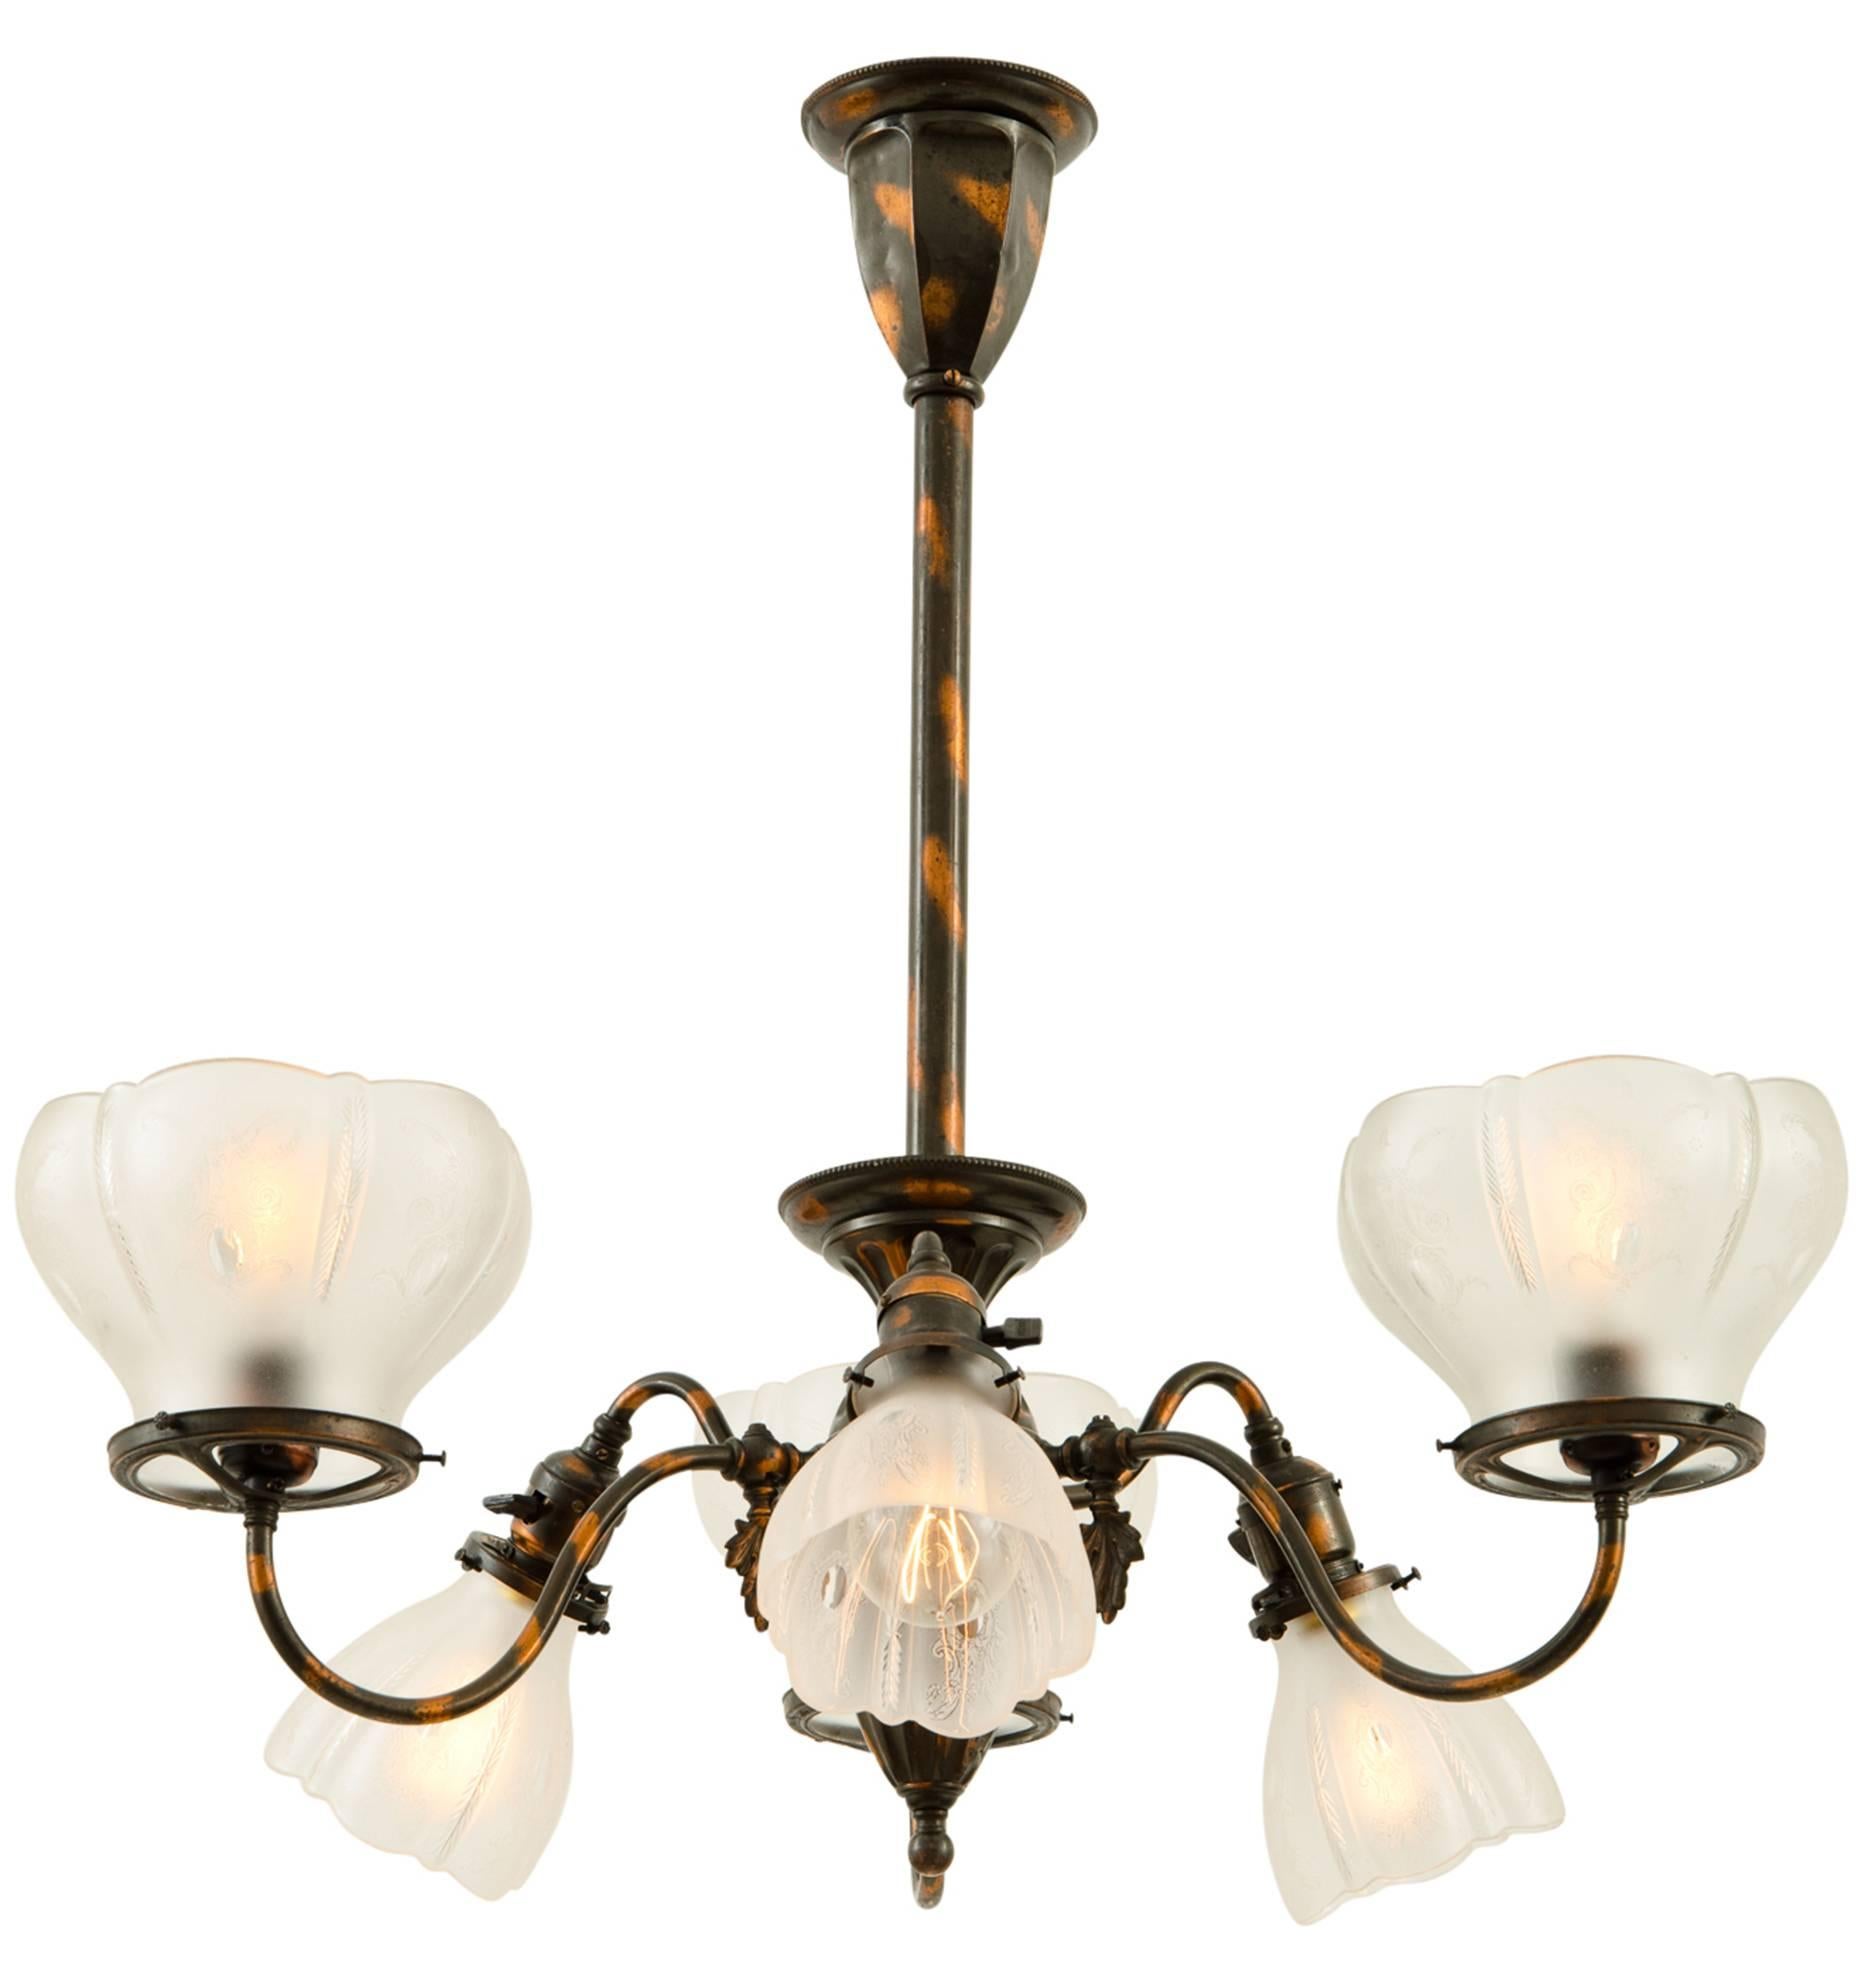 With feet in both the 19th and 20th centuries, the Victorian era saw a huge transformation of lighting technology and the evolution of many styles. The period began with gas-powered lighting, which transitioned to electricity just before the turn of